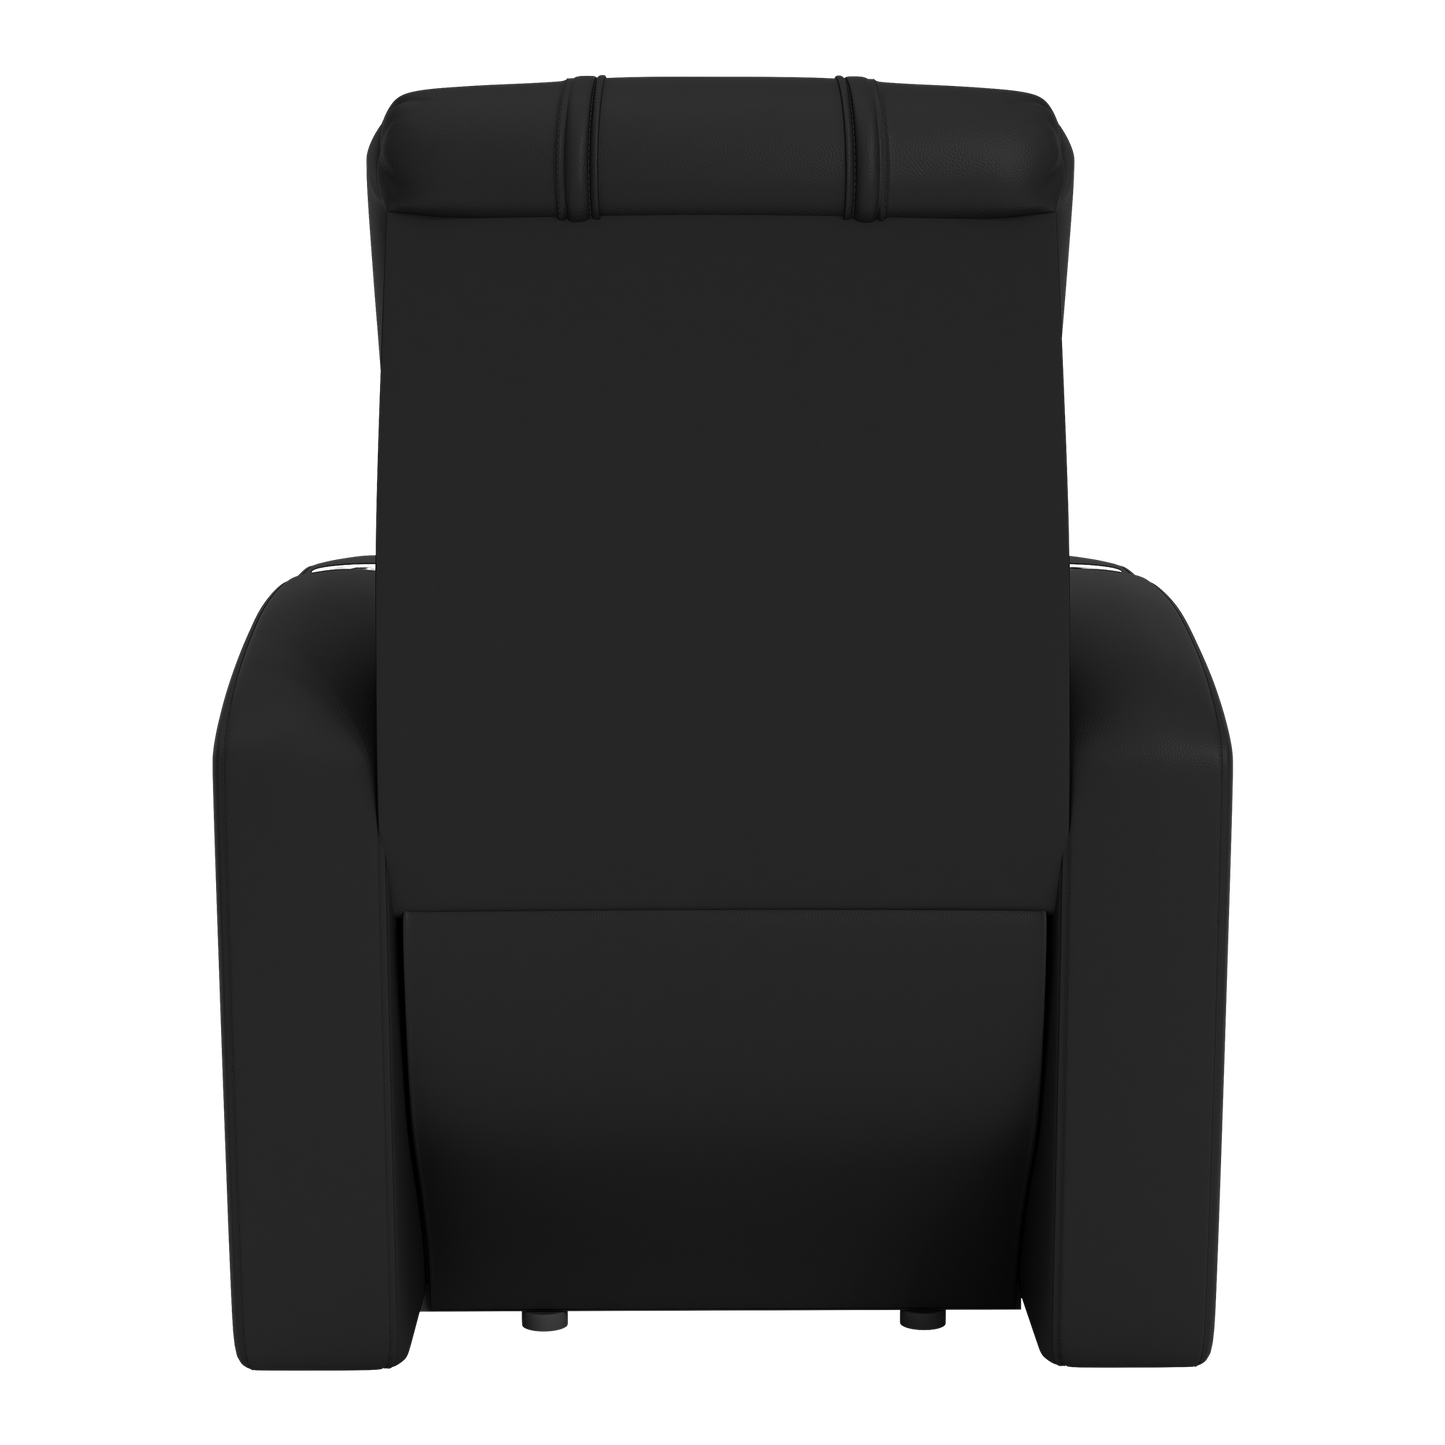 Stealth Recliner with C8R Jake Yellow Logo